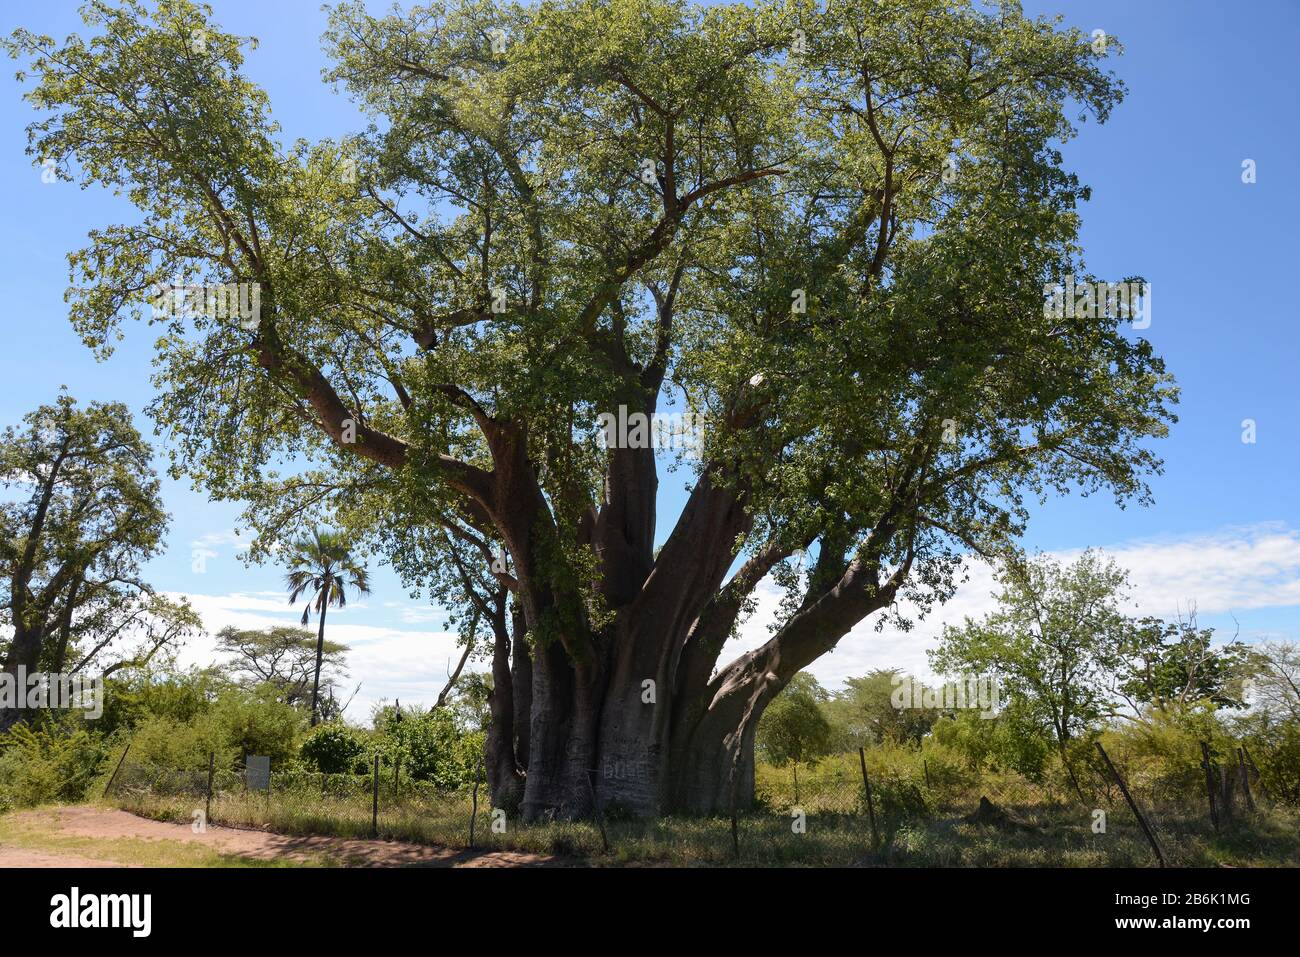 Giant African Baobab near Victoria Falls, Zimbabwe of scientific name Adansonia digitata. It is also referred as The Big Tree by its massive size. Stock Photo